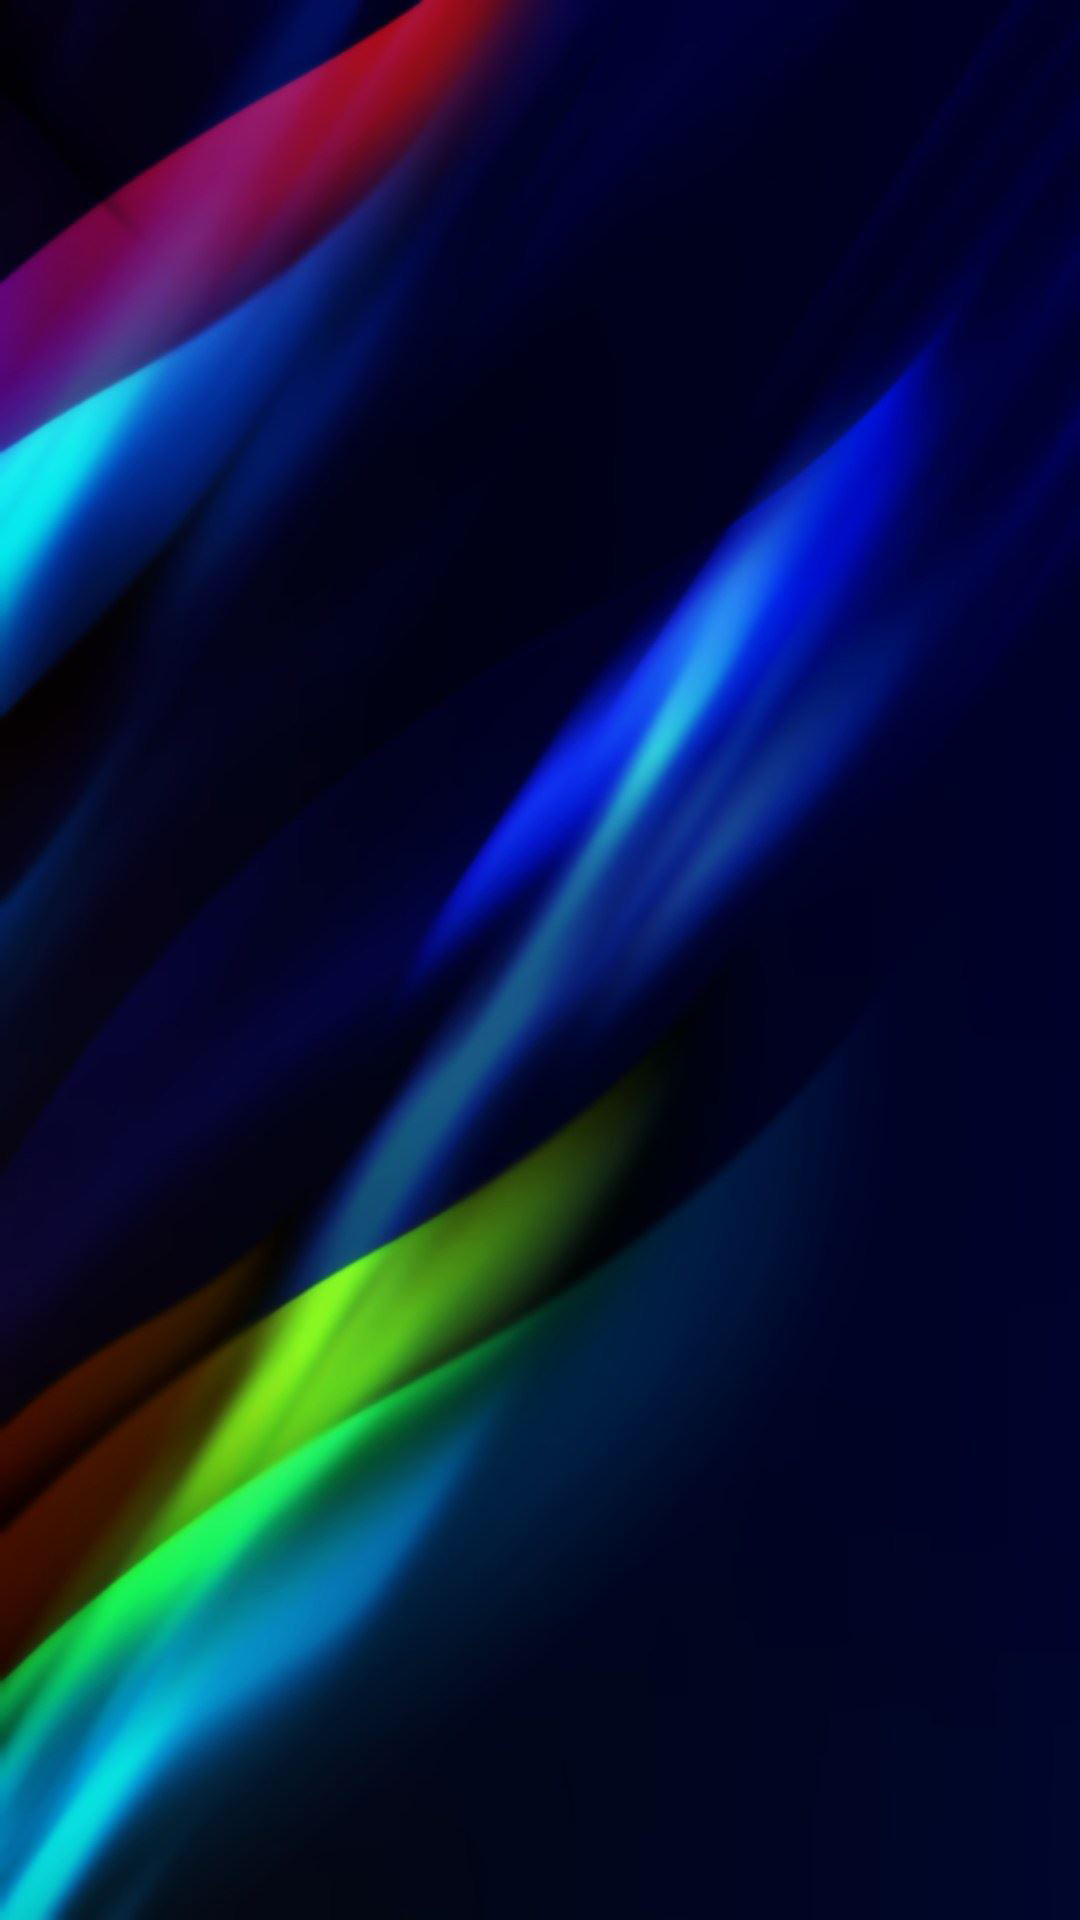 The Best Abstract Samsung Galaxy S5 Wallpaper